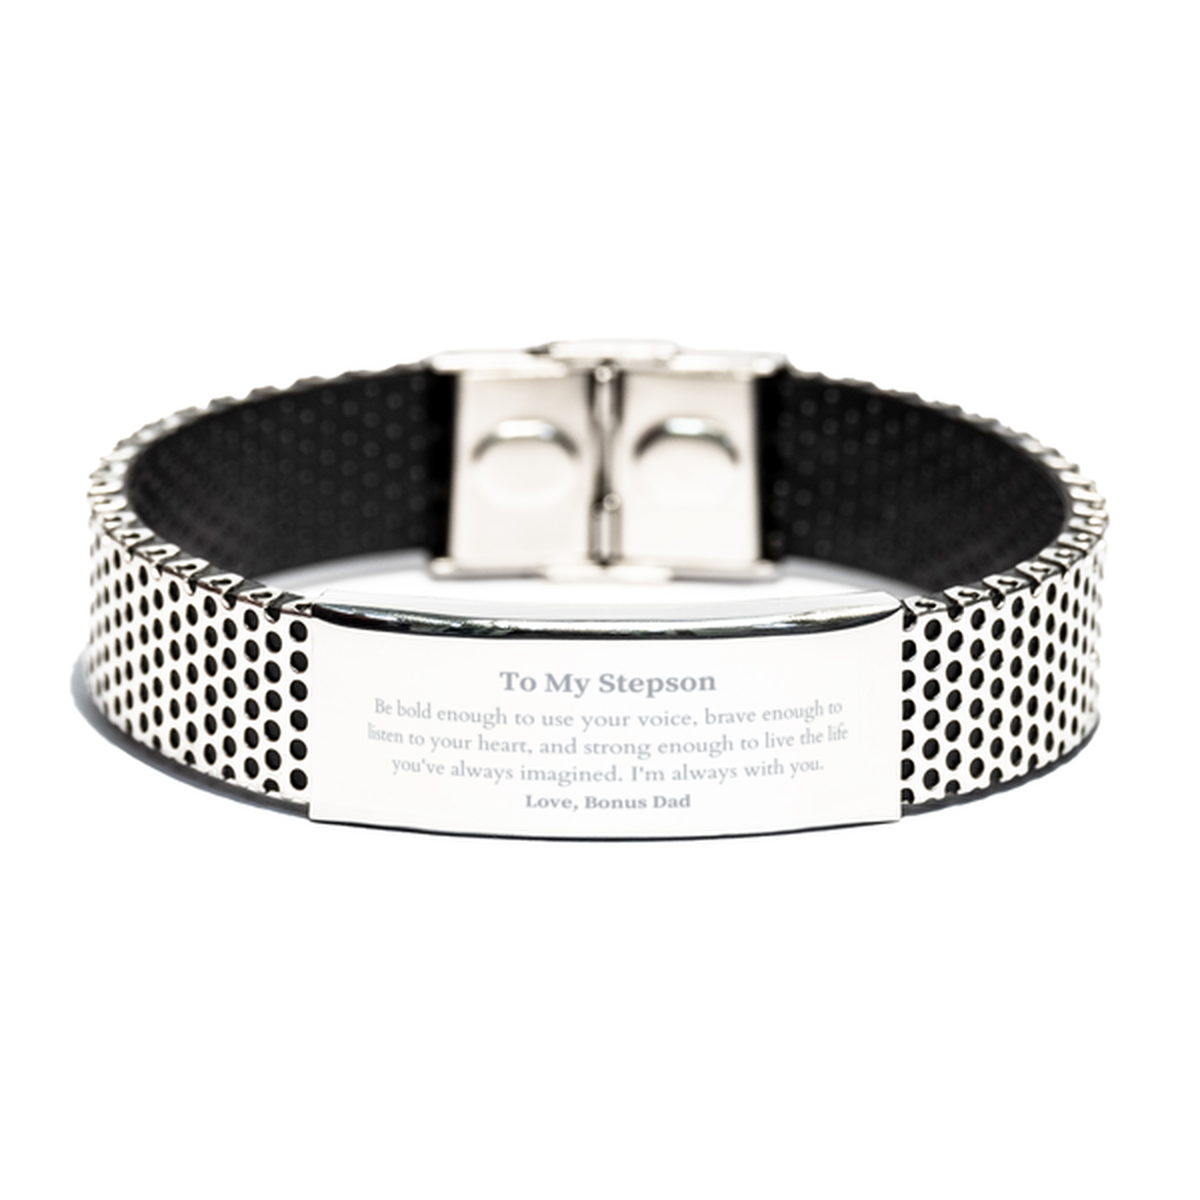 Keepsake Stepson Stainless Steel Bracelet Gift Idea Graduation Christmas Birthday Stepson from Bonus Dad, Stepson Be bold enough to use your voice, brave enough to listen to your heart. Love, Bonus Dad